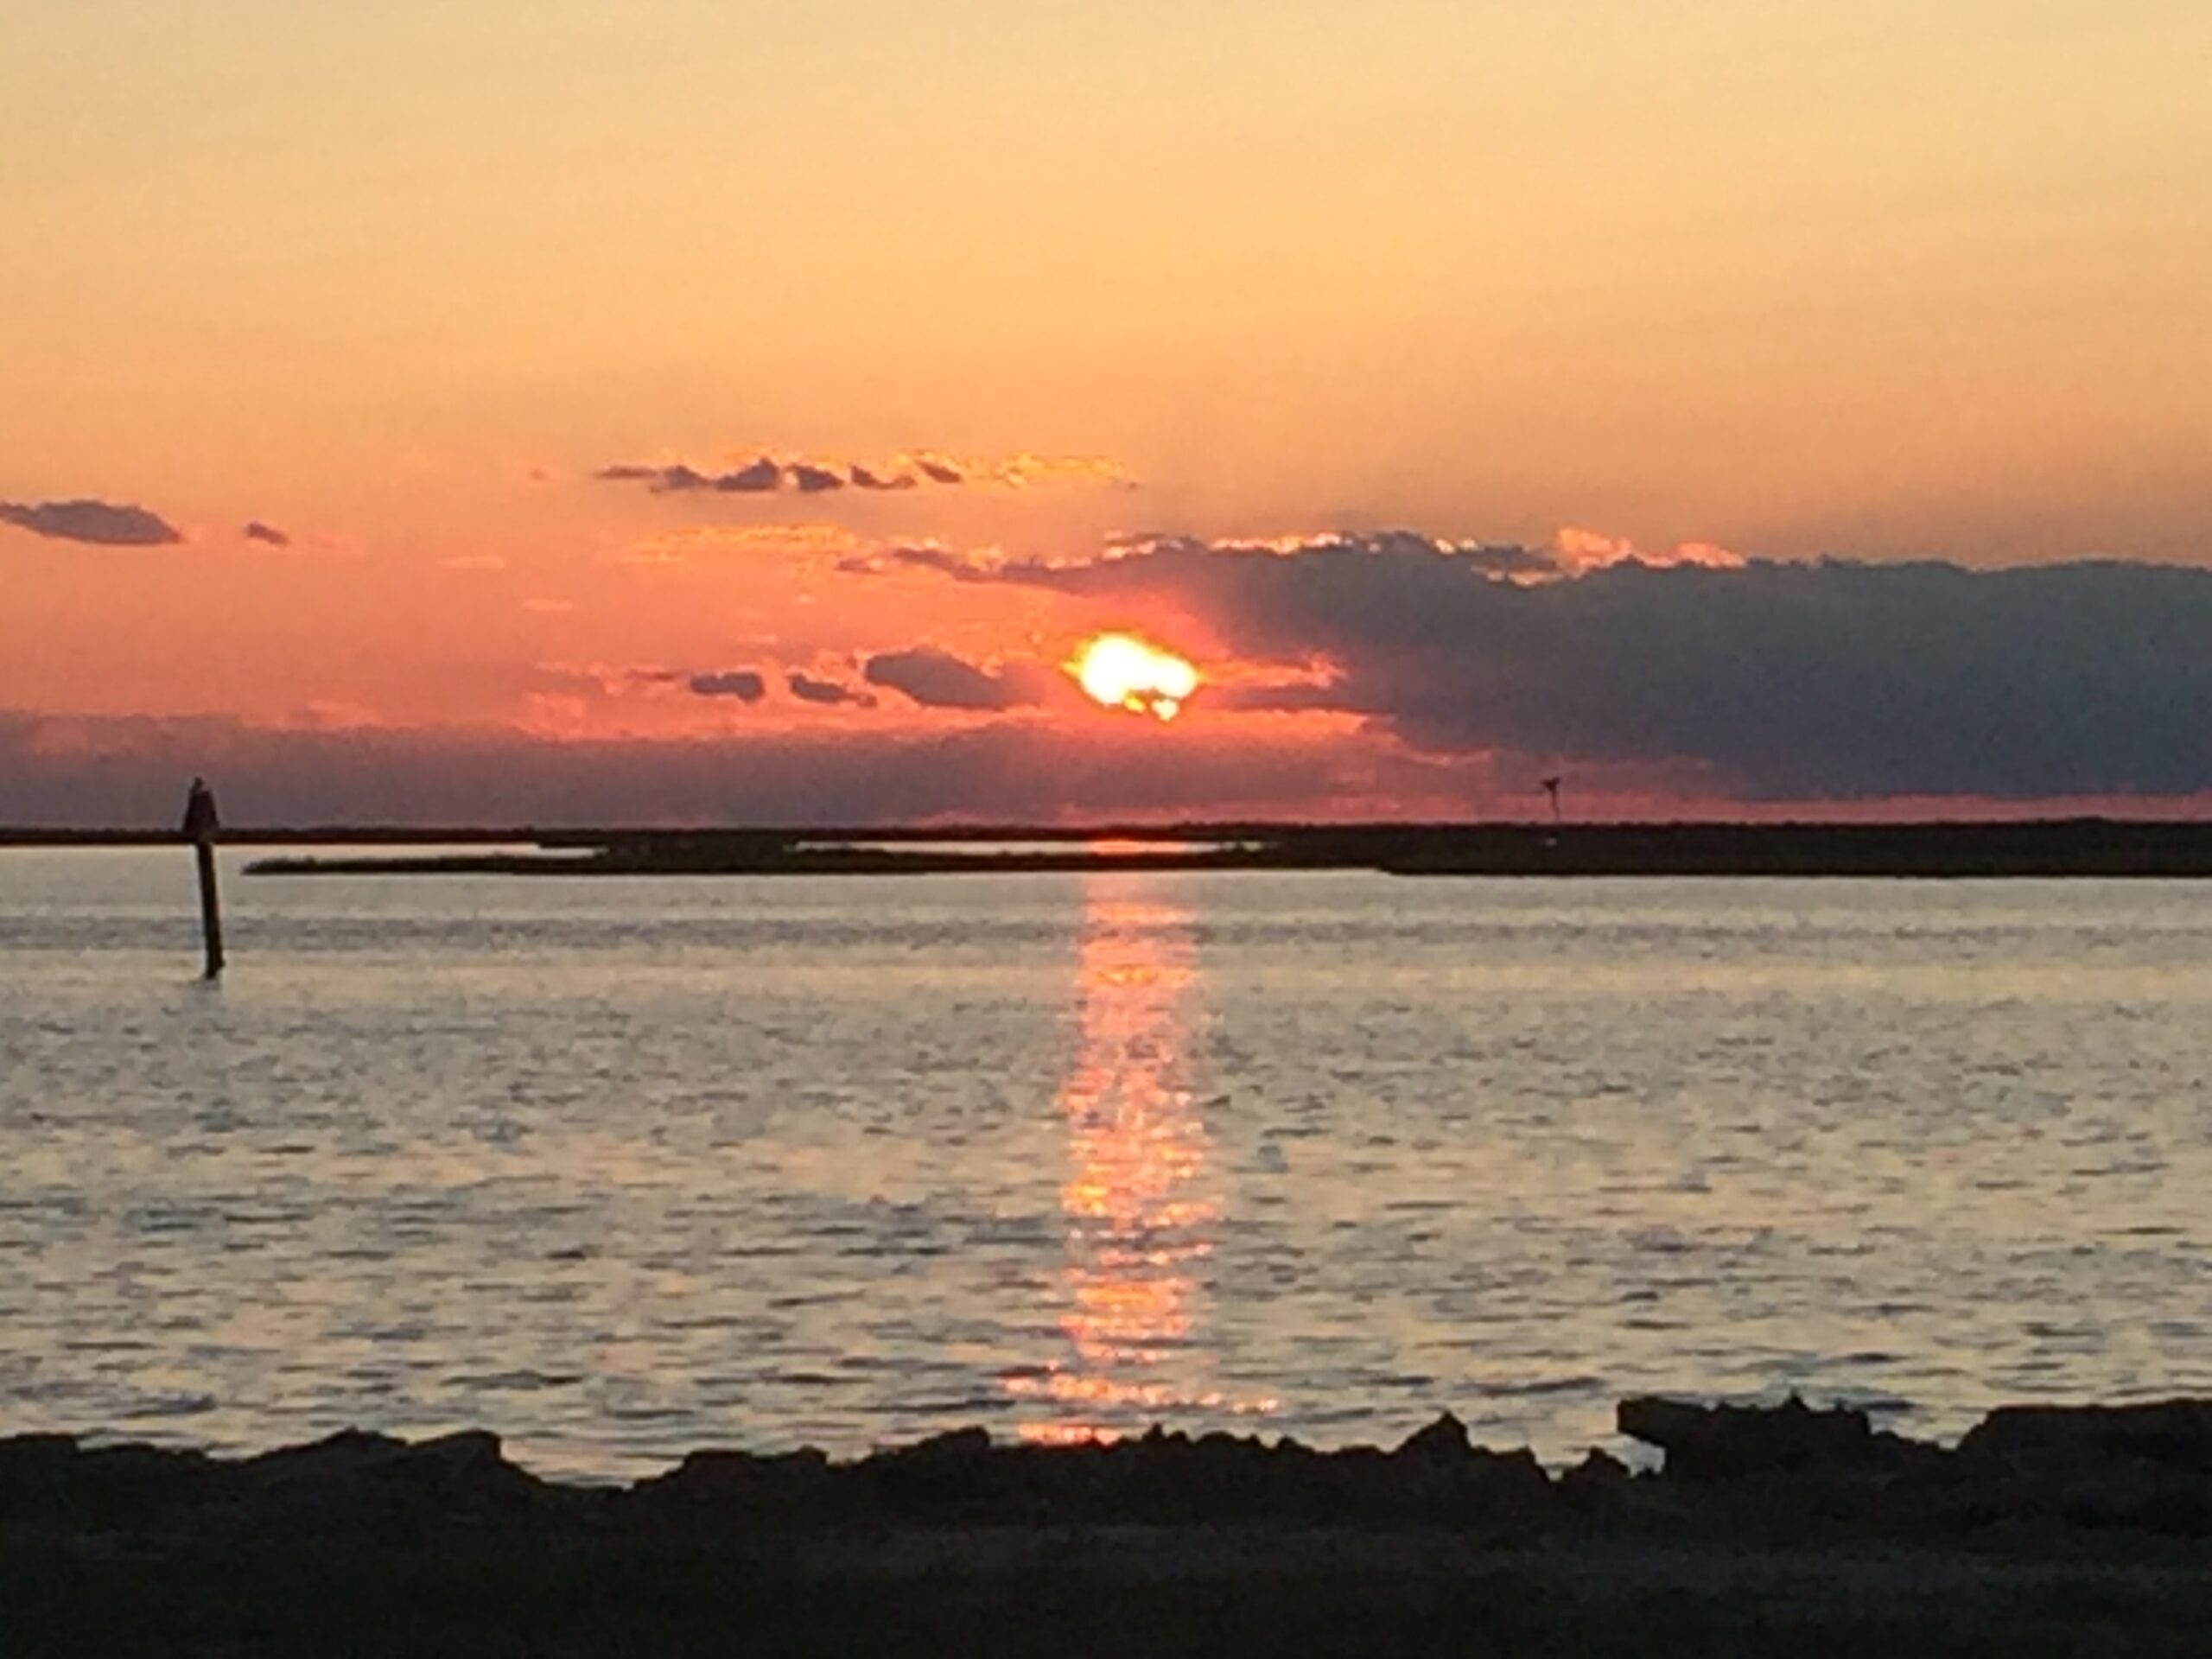 Sunset over the water, Crisfield, MD